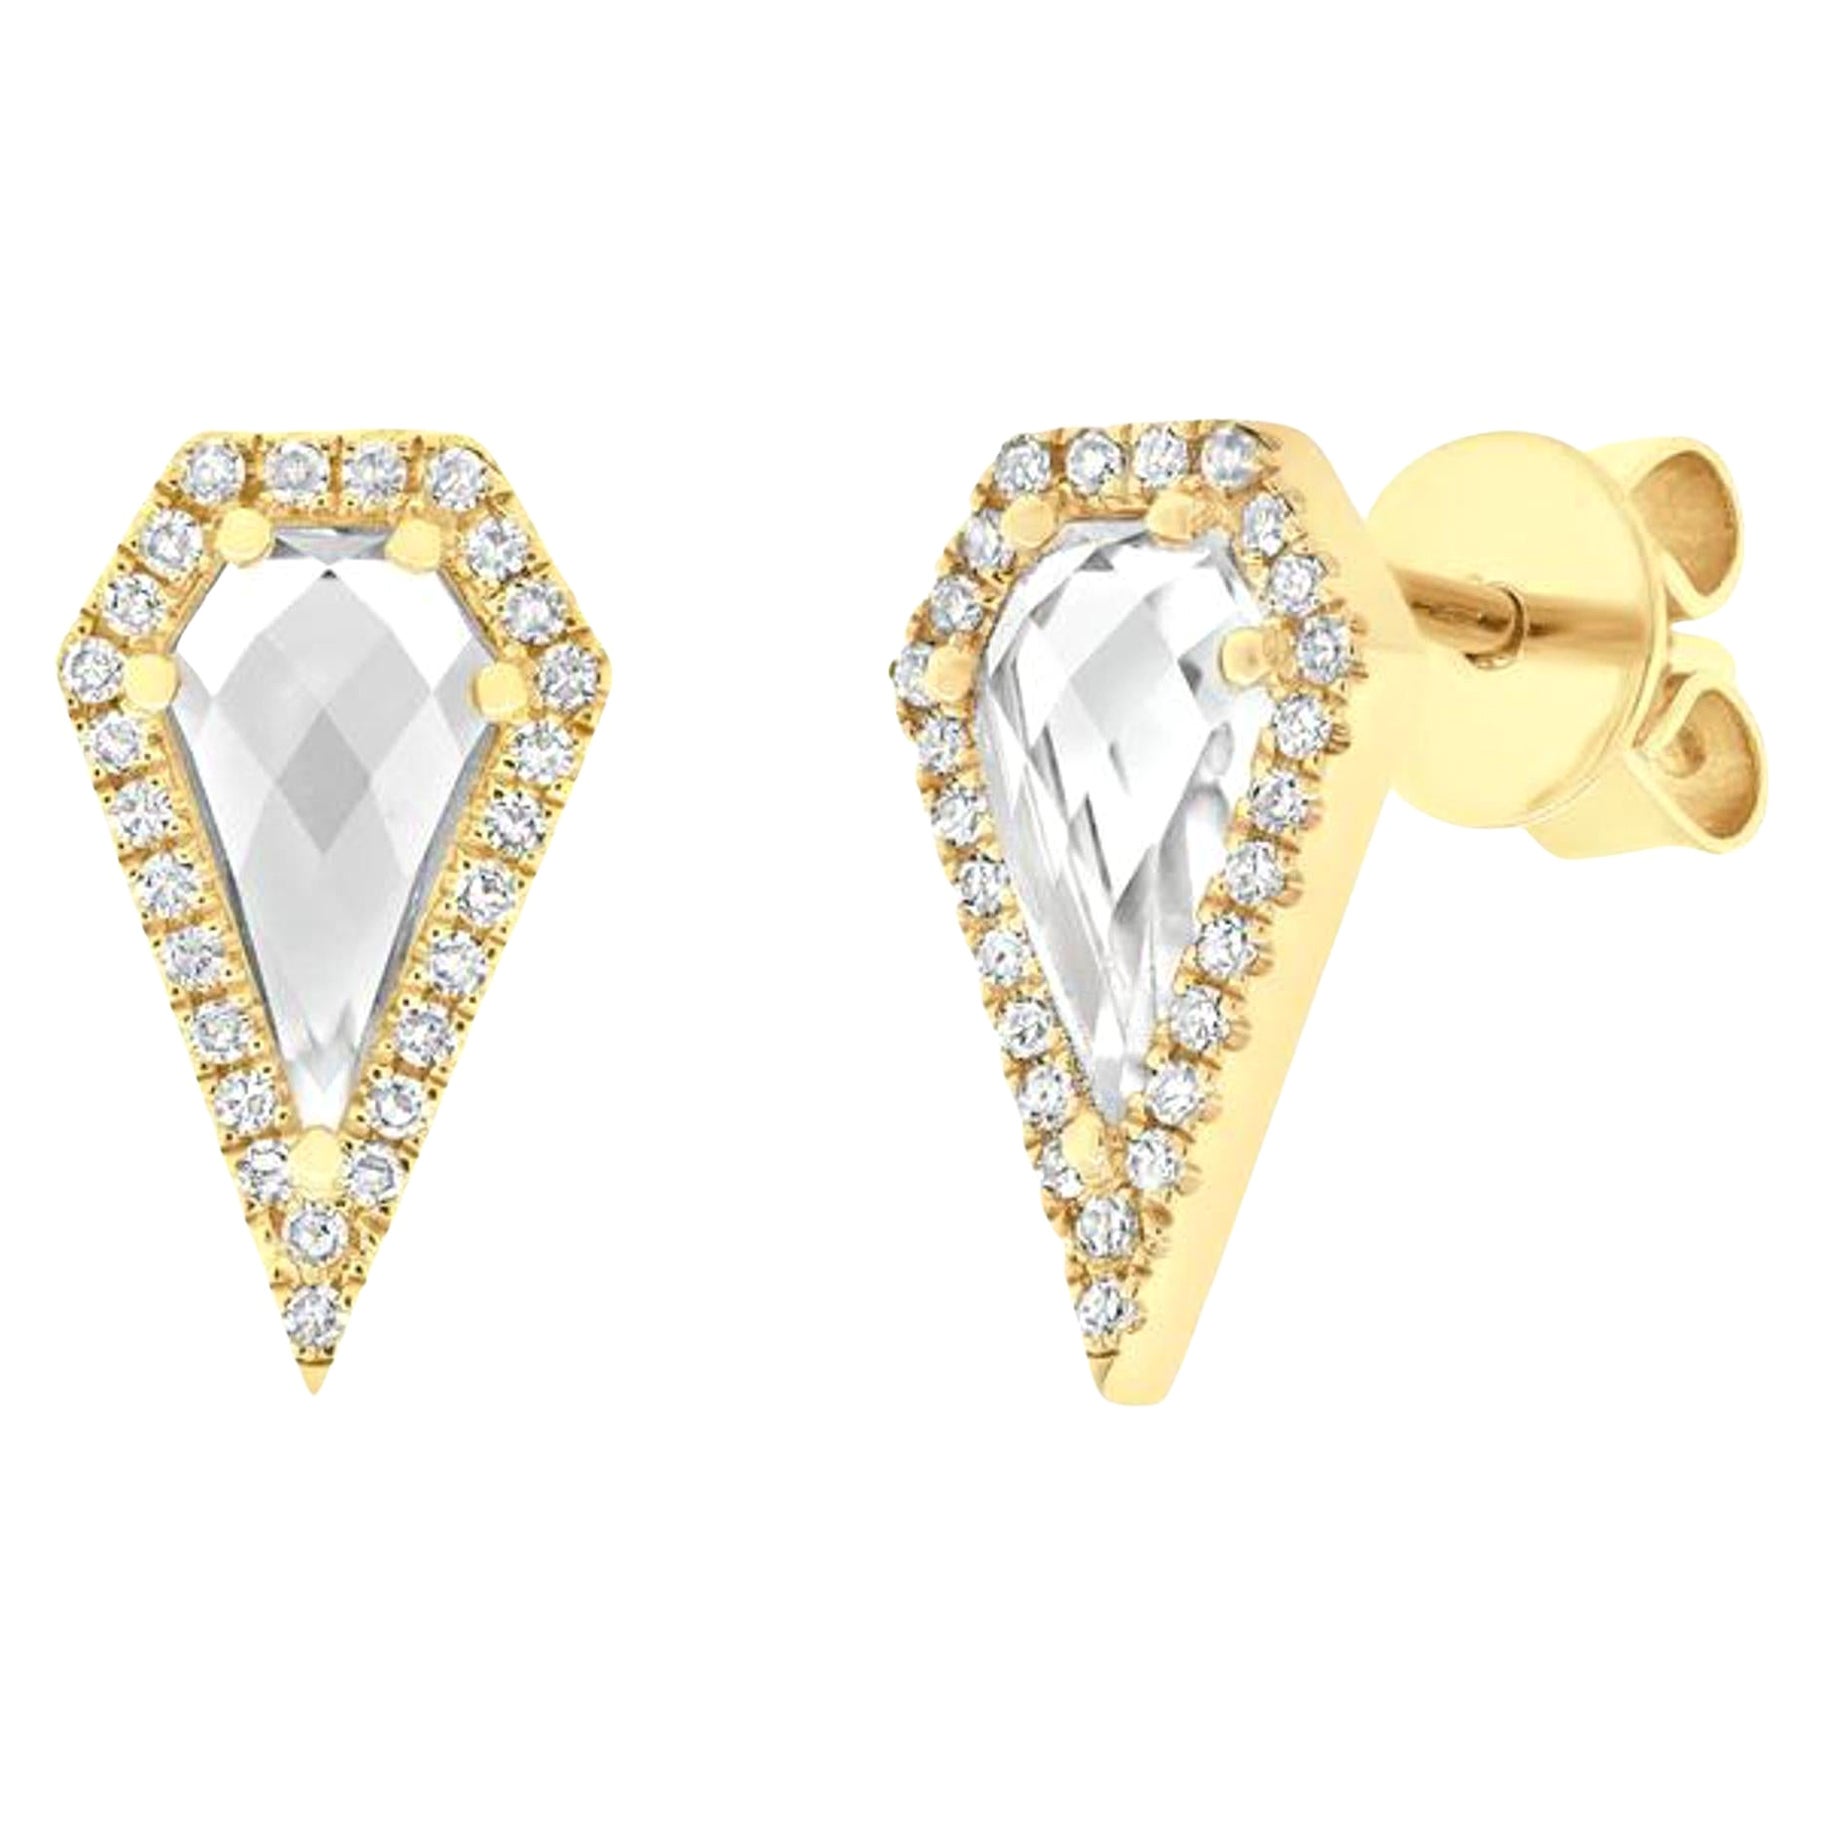 Pave Diamond 0.12cttw and White Topaz 1.20cttw Earrings 14K Yellow Gold For Sale